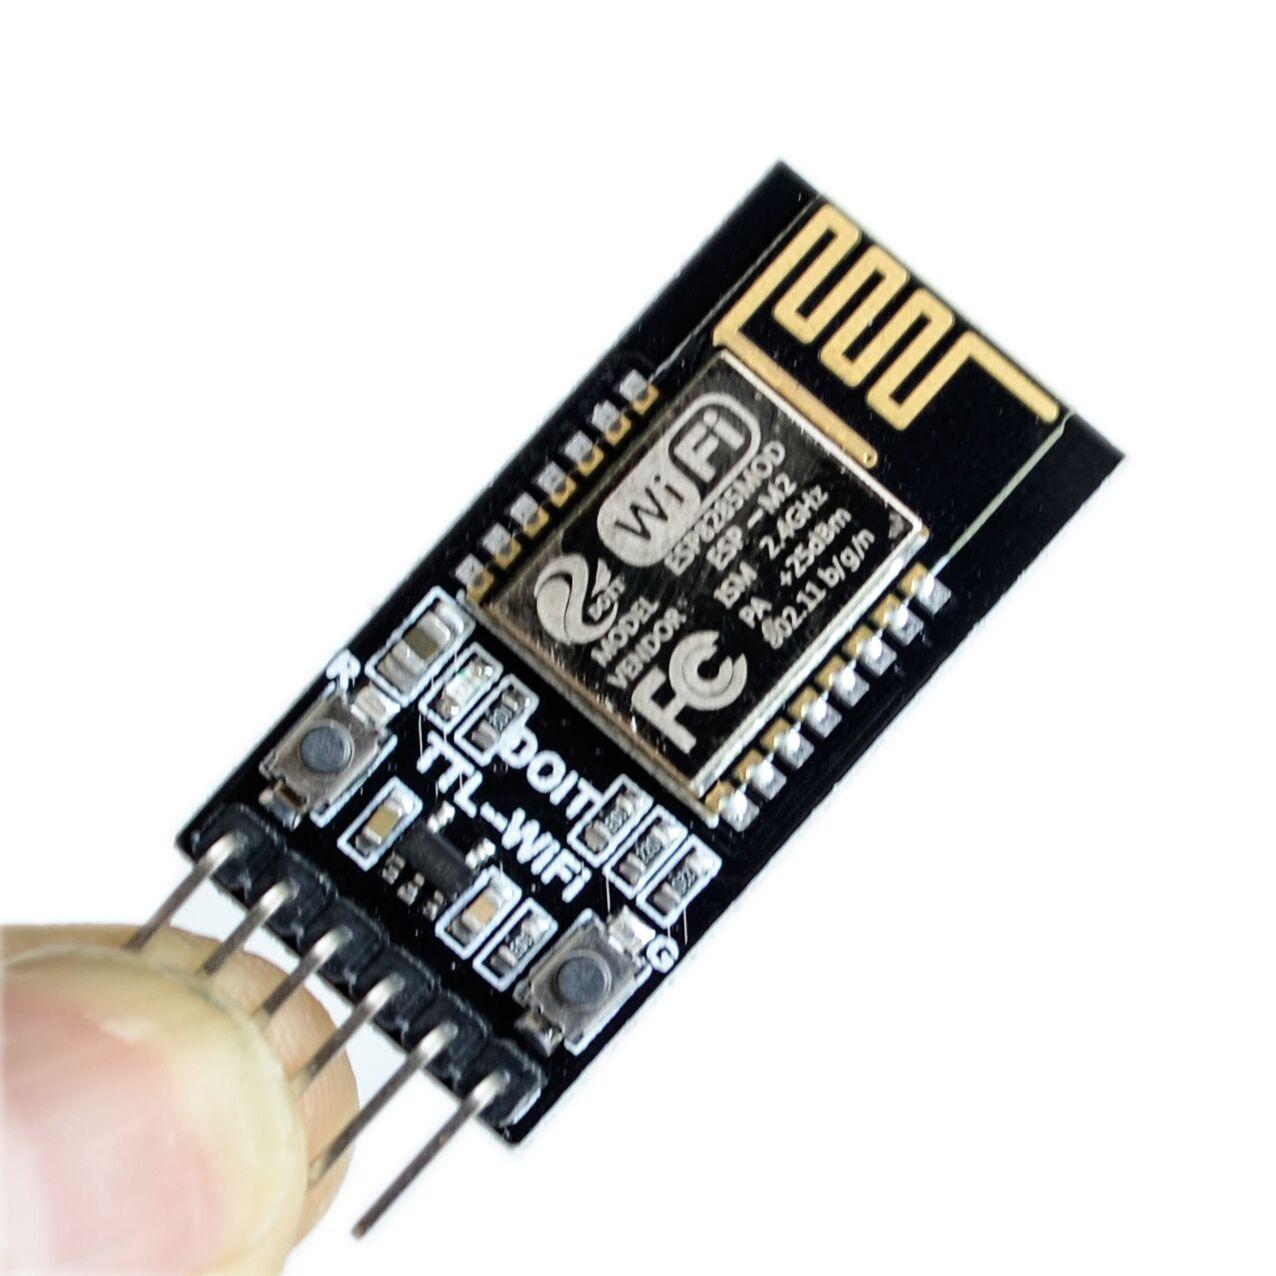 DT-06 Wireless WiFi Serial Port Transparent Transmission Module TTL to WiFi Compatible with Bluetooth HC-06 interface ESP-M2